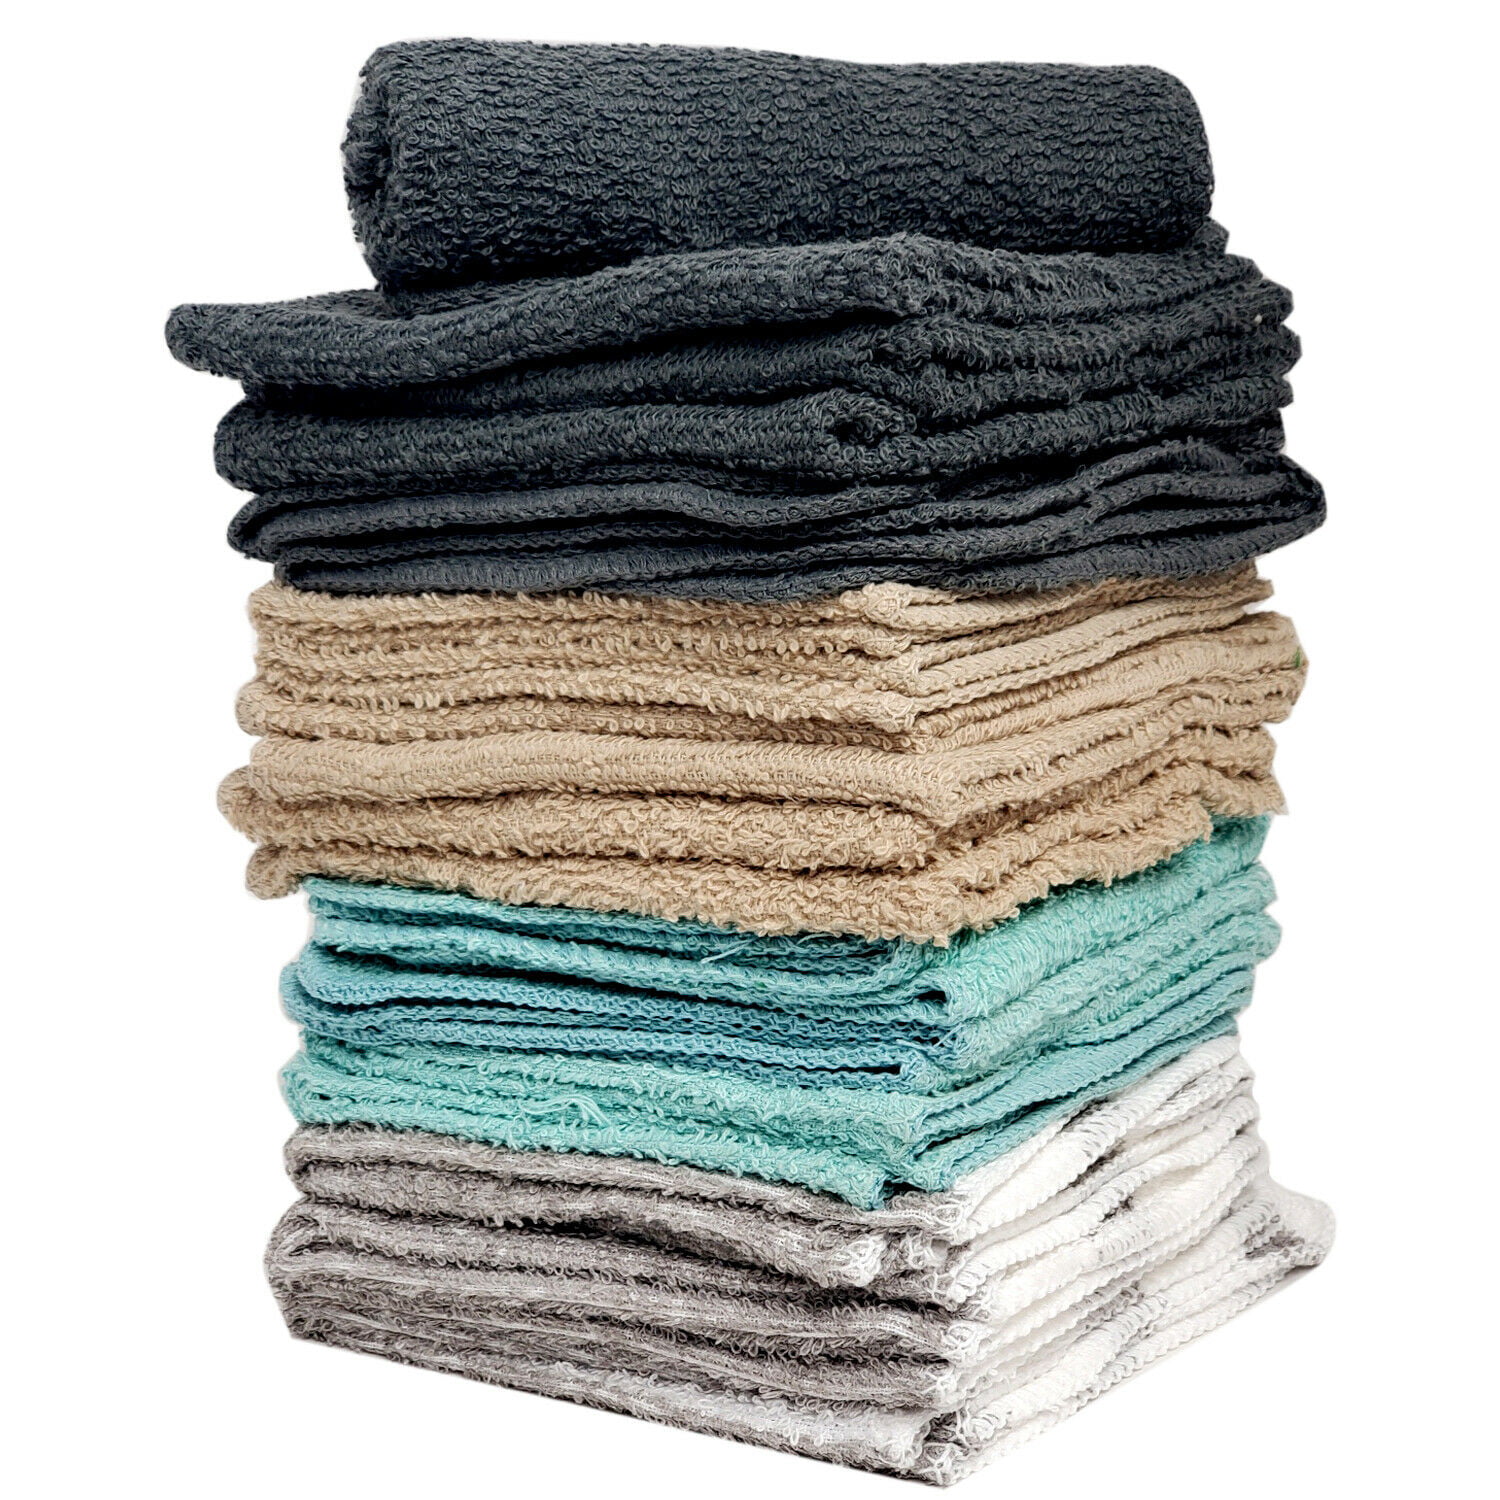 60 Pack 12 x 12 inch Soft Natural Cotton Details about   100% Cotton Wash Cloth Towels 24 Pack 